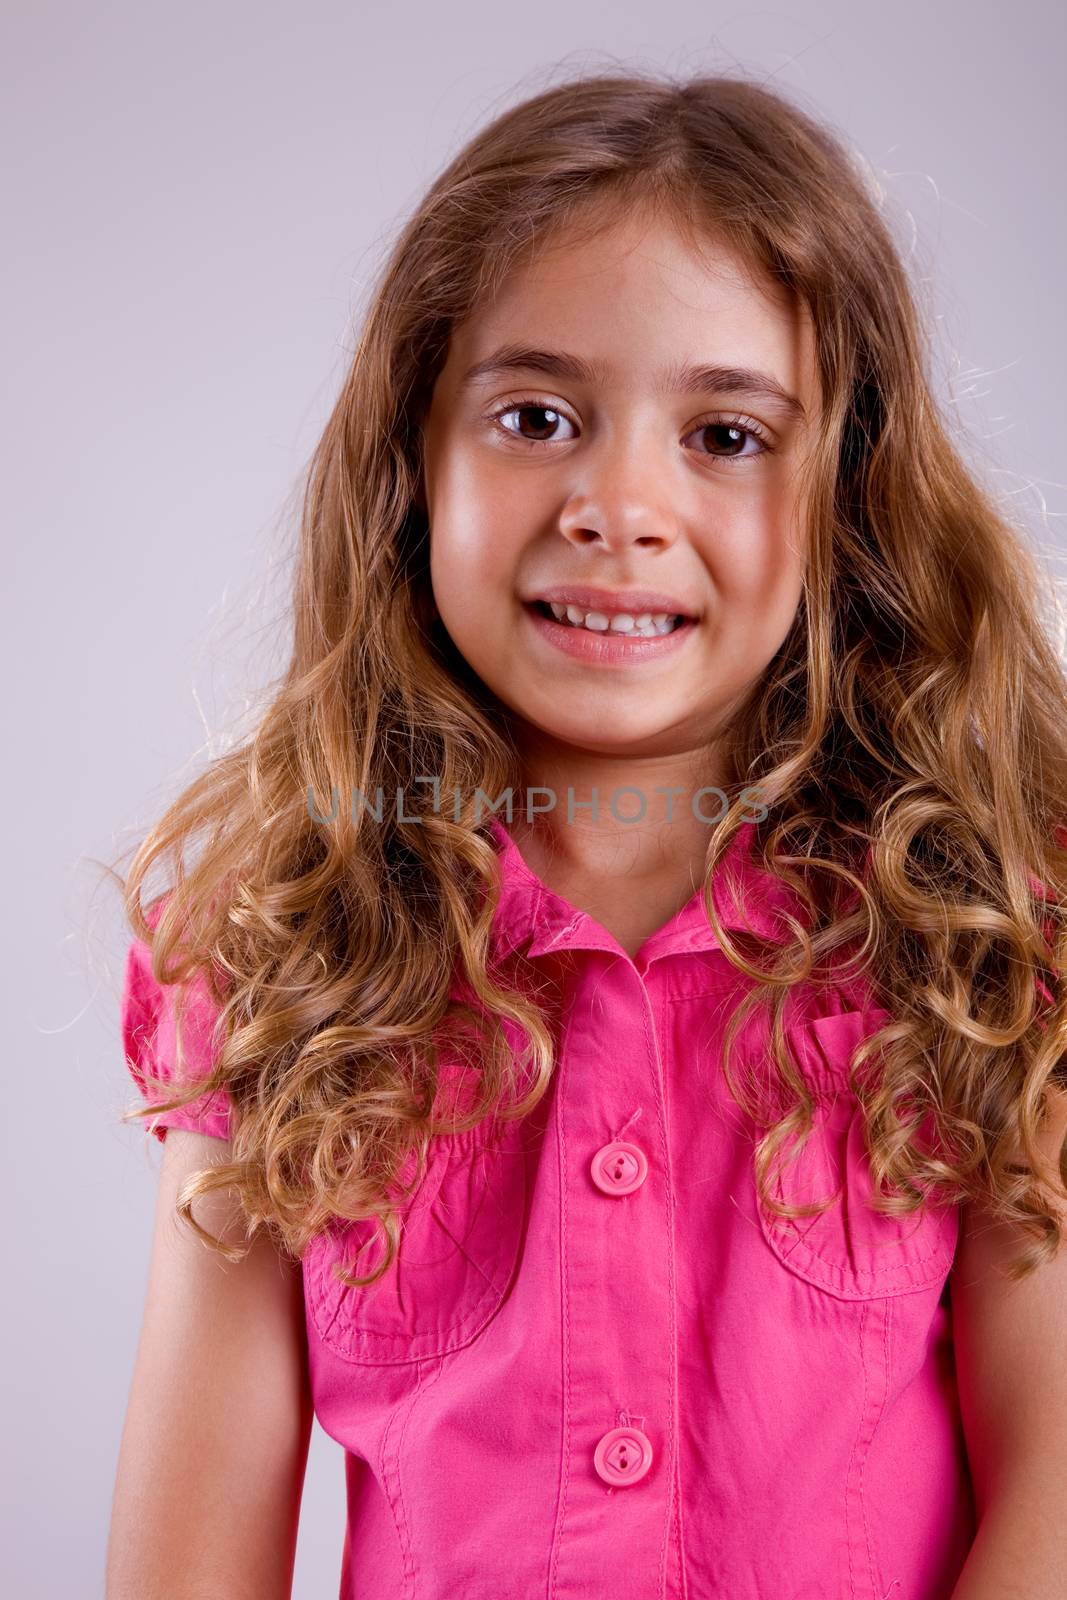 young happy girl smiling, close up portrait